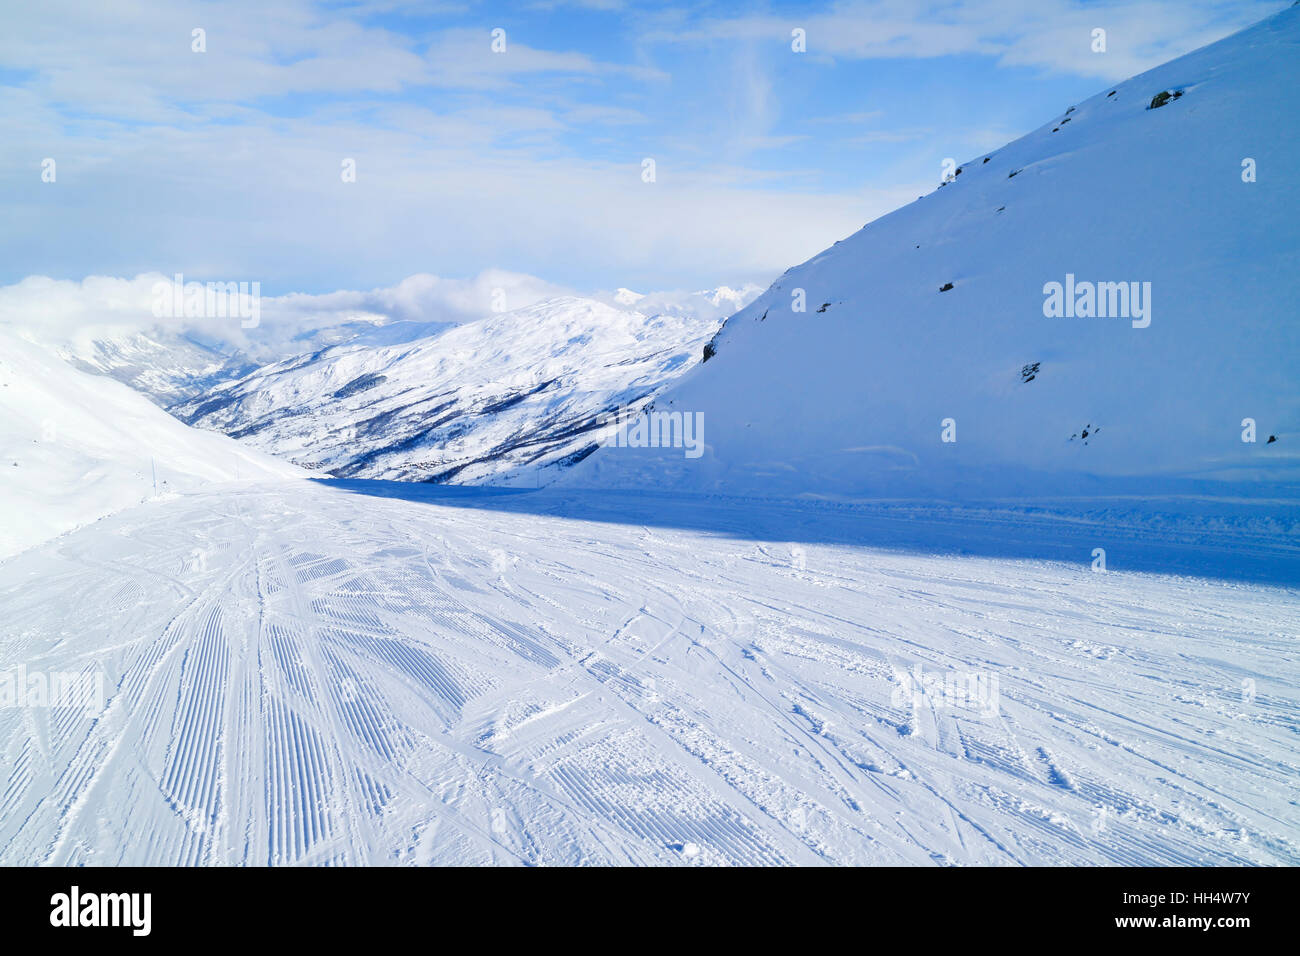 On downhill skiing slope towards Val Thorens in 3 Valleys winter resort, France Stock Photo